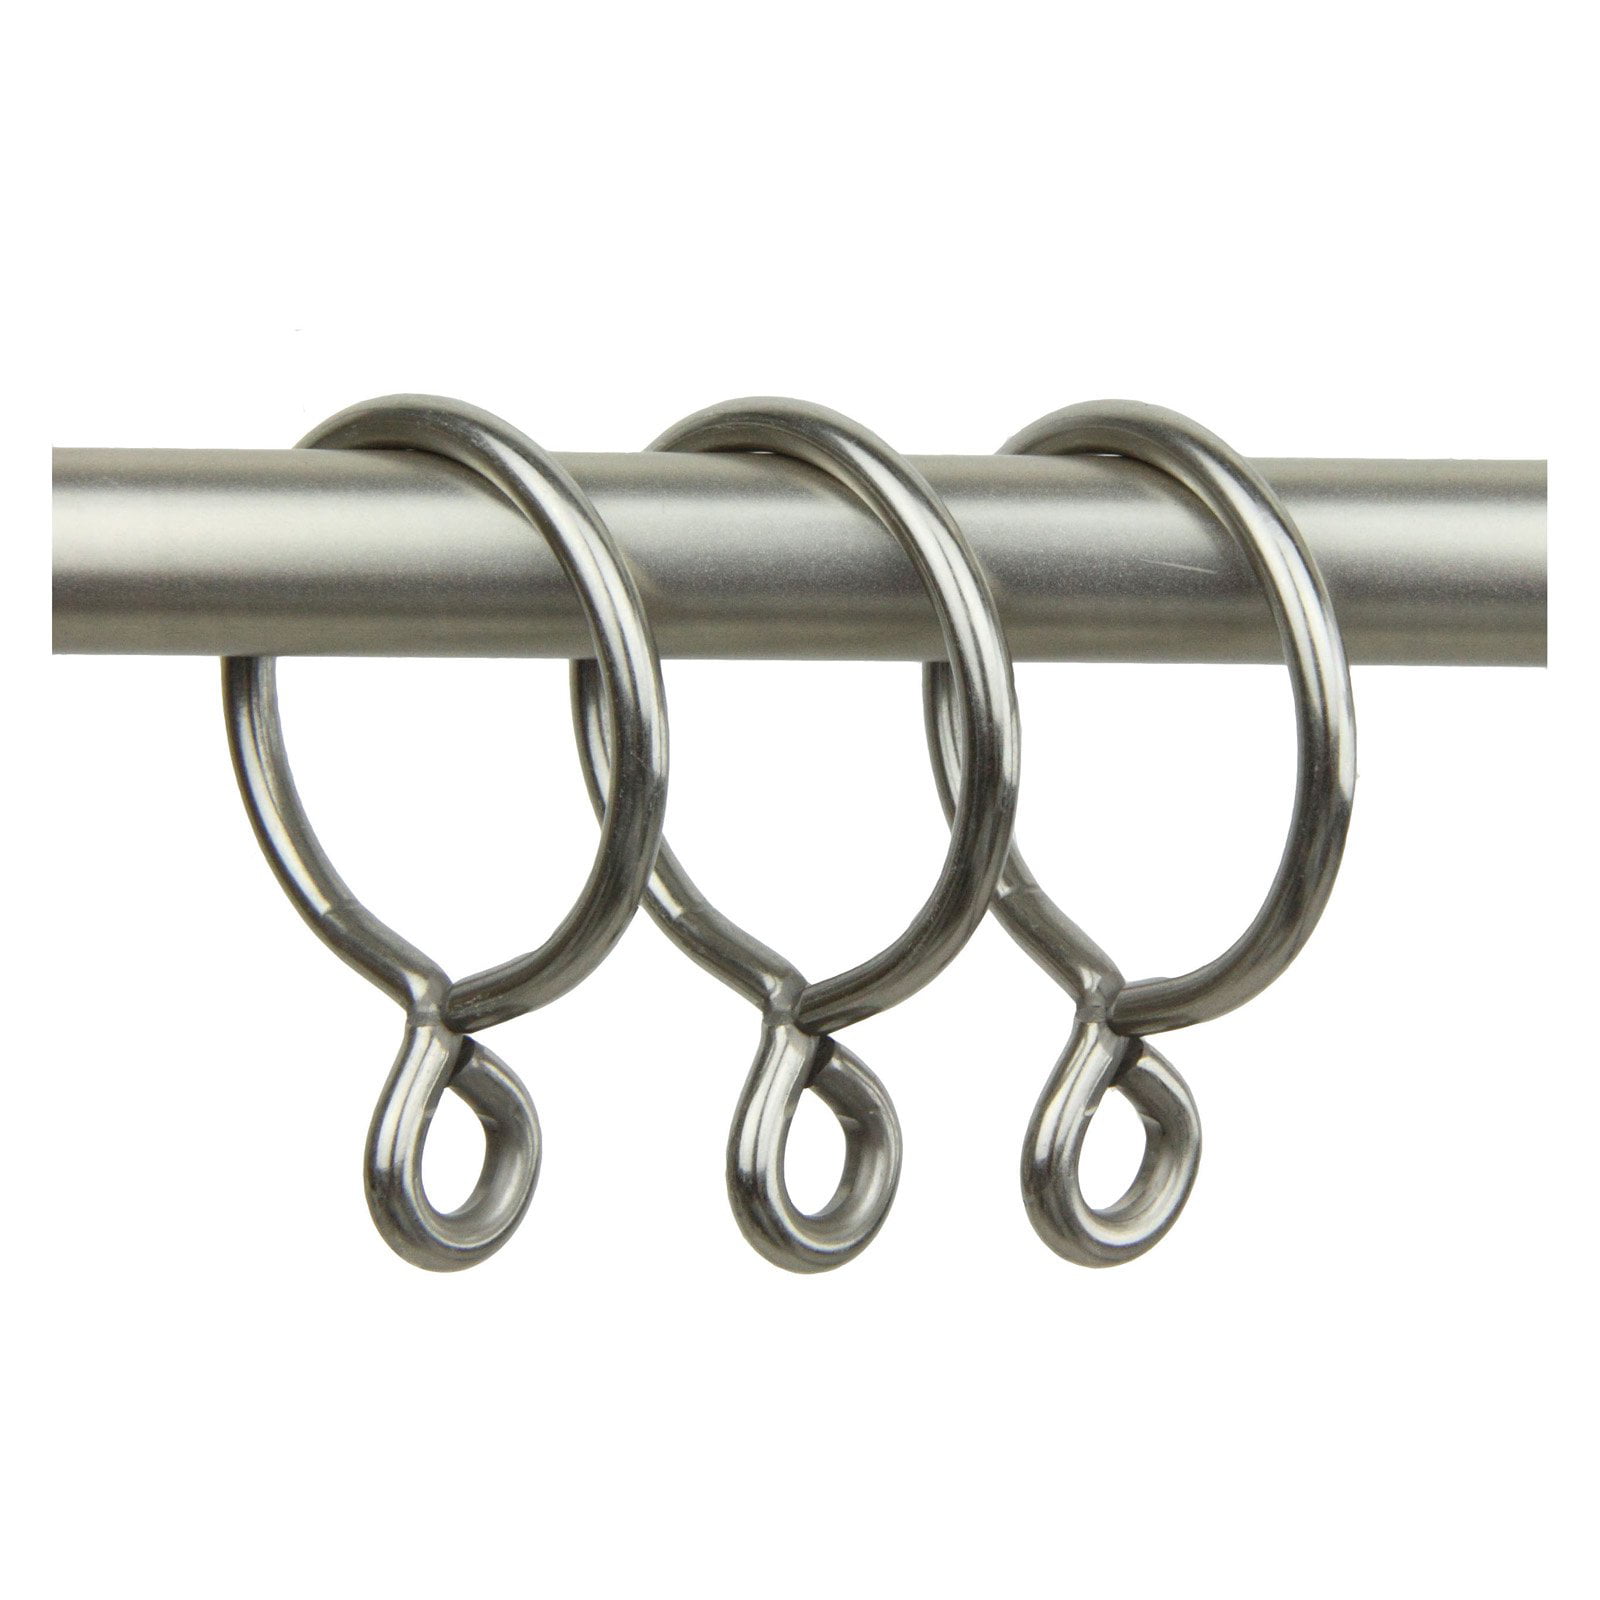 10 x Curtains Rings with Clips,Stainless Steel Window Curtain Clip Rings Hanging Rings Hooks for Bathroom Cafe Windows and Drapes Silver 